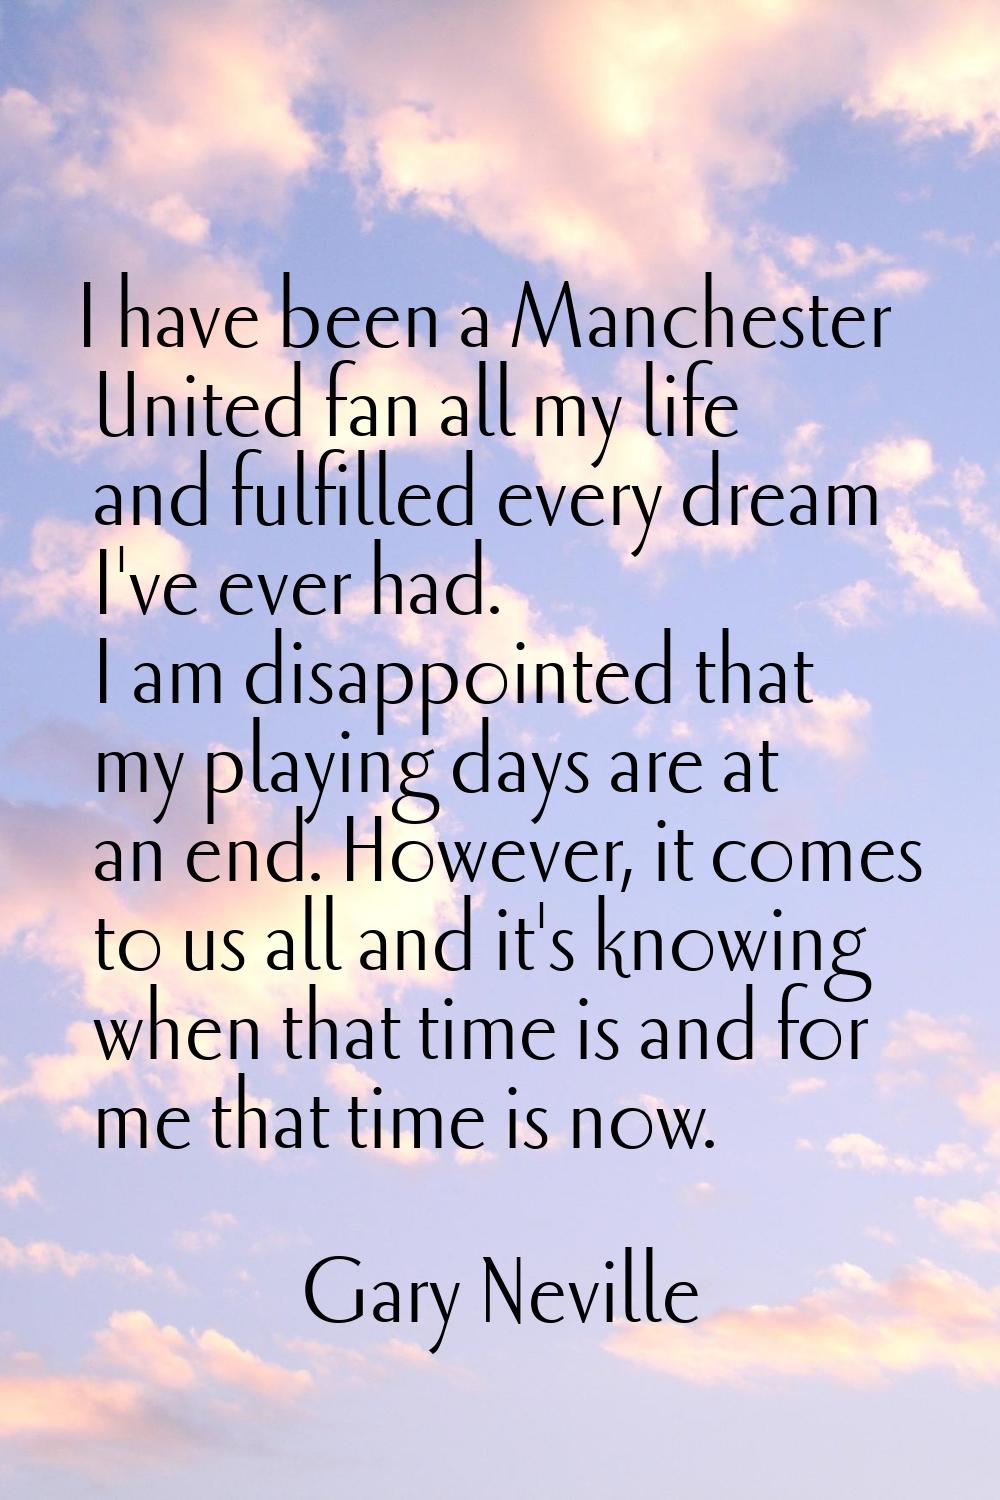 I have been a Manchester United fan all my life and fulfilled every dream I've ever had. I am disap